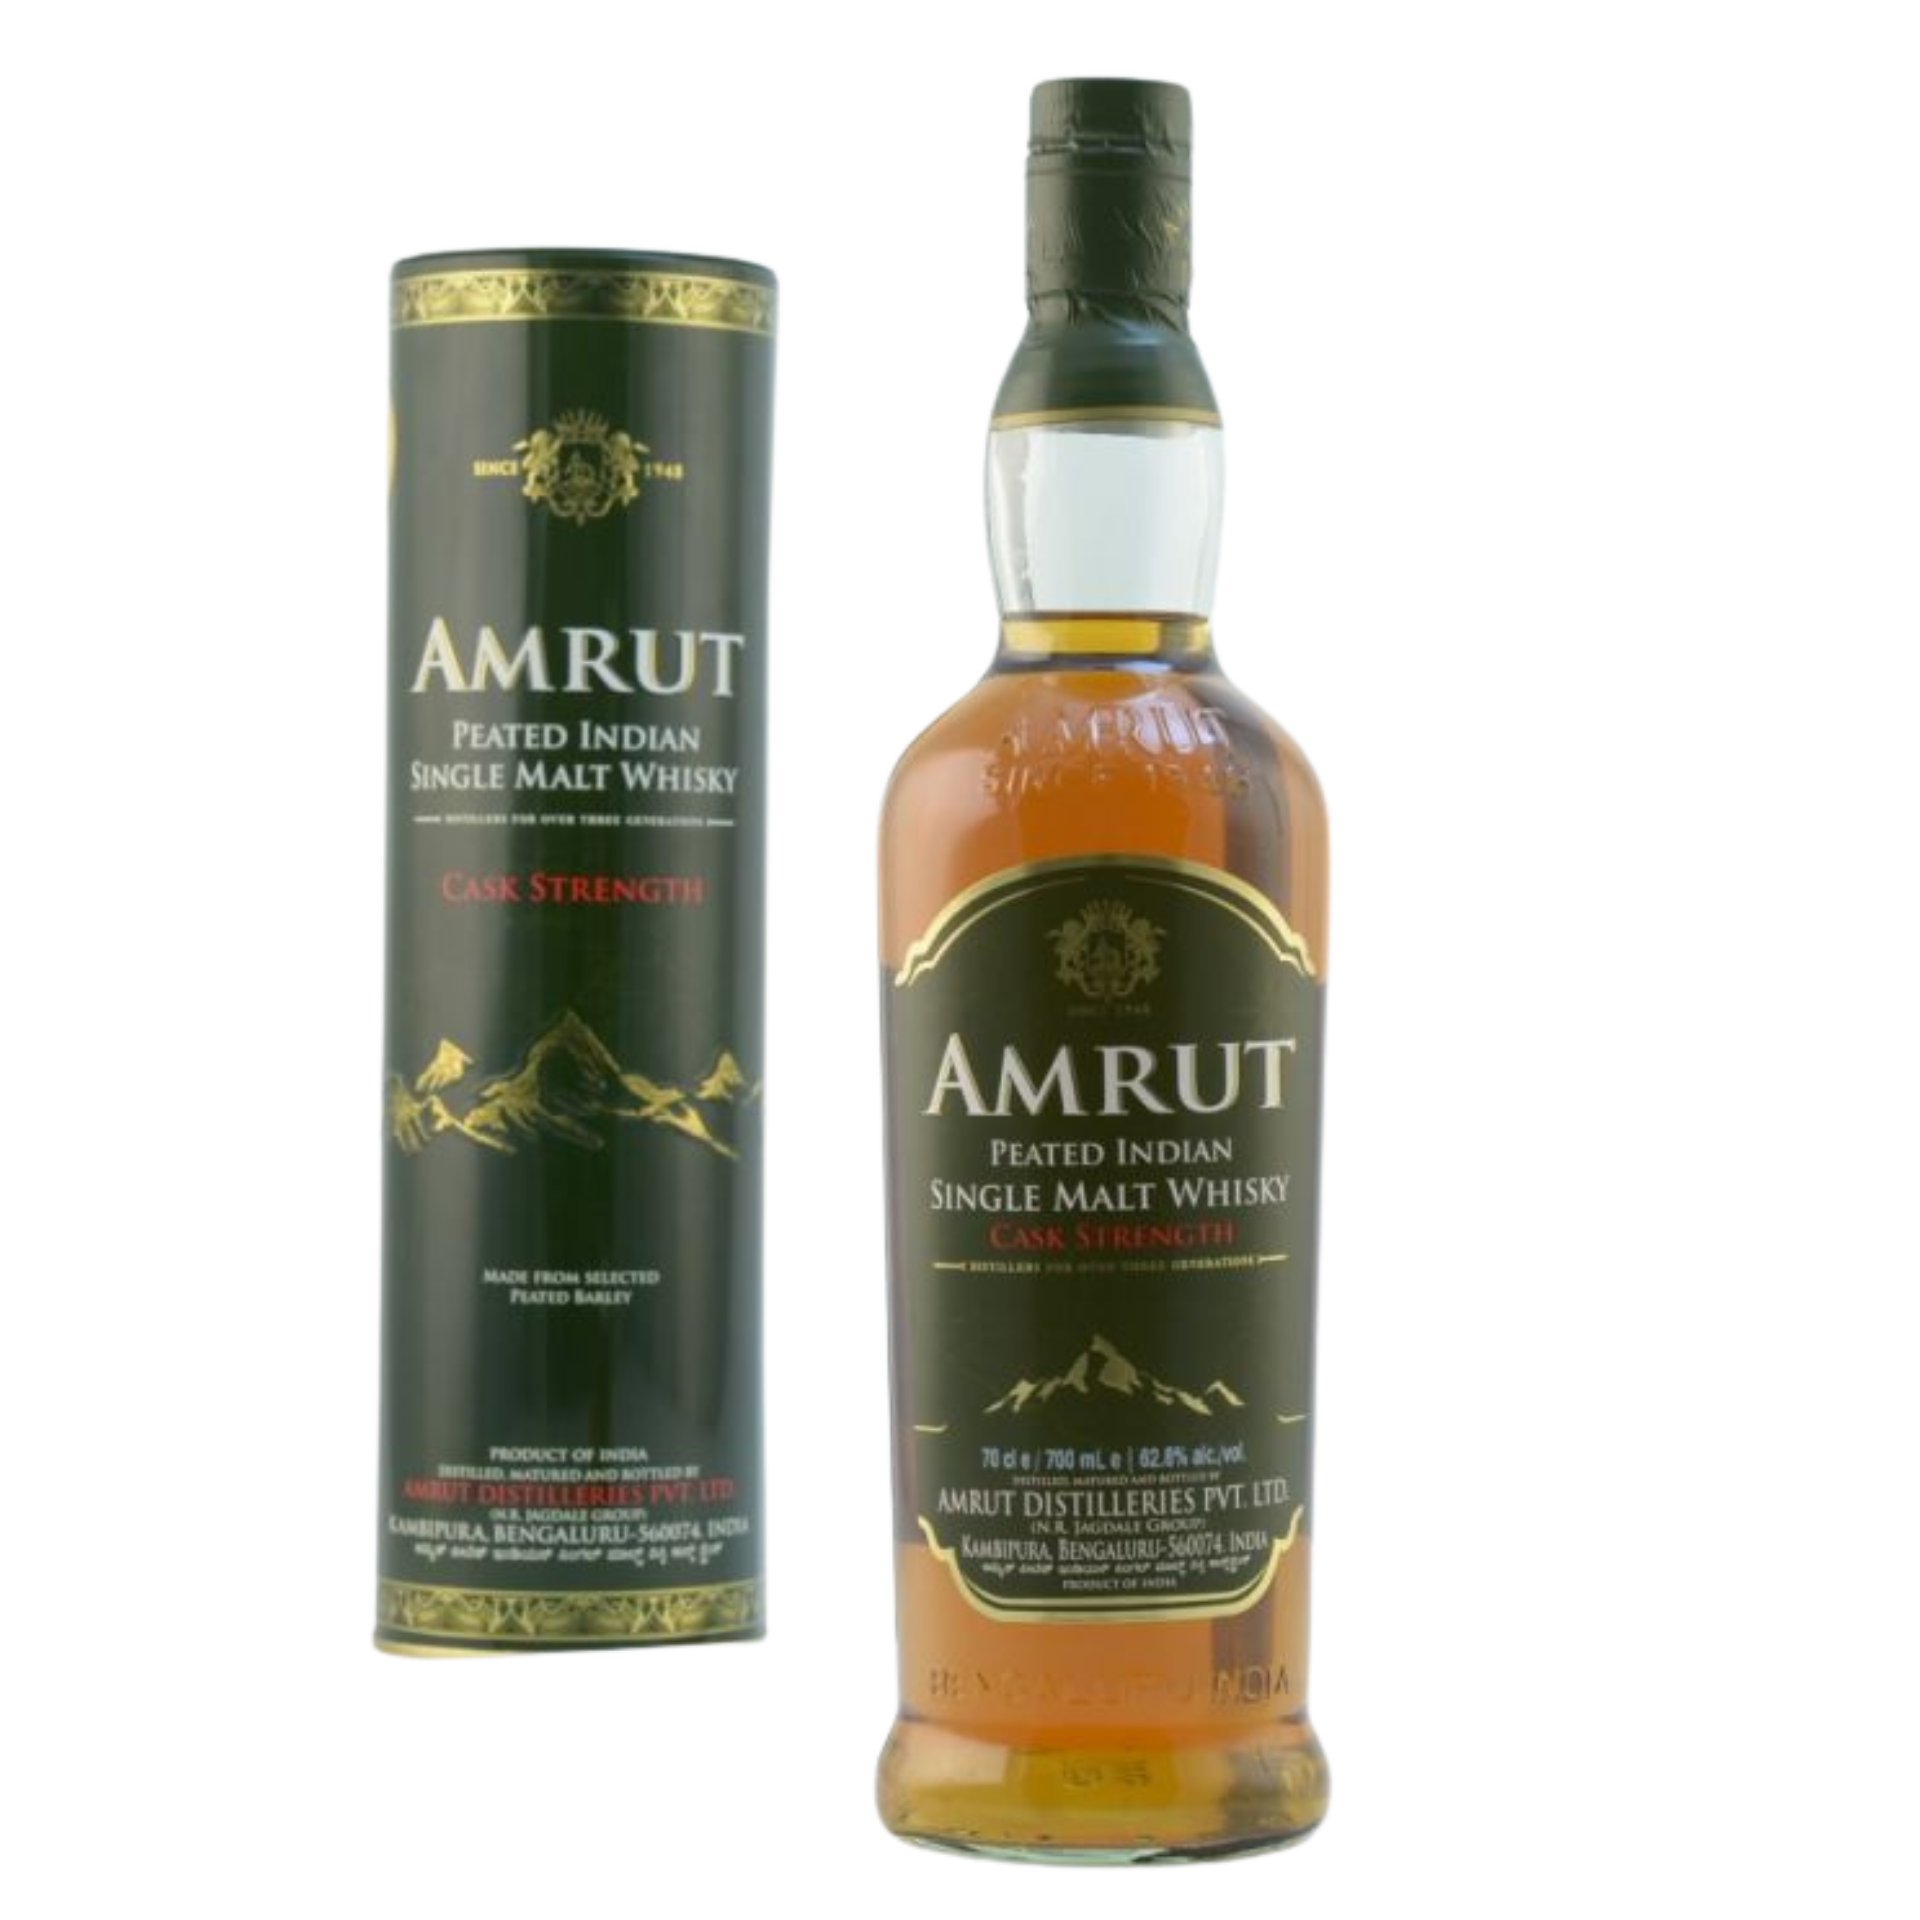 Amrut Peated Indian Whisky Cask Strength 62,8% 0,7l